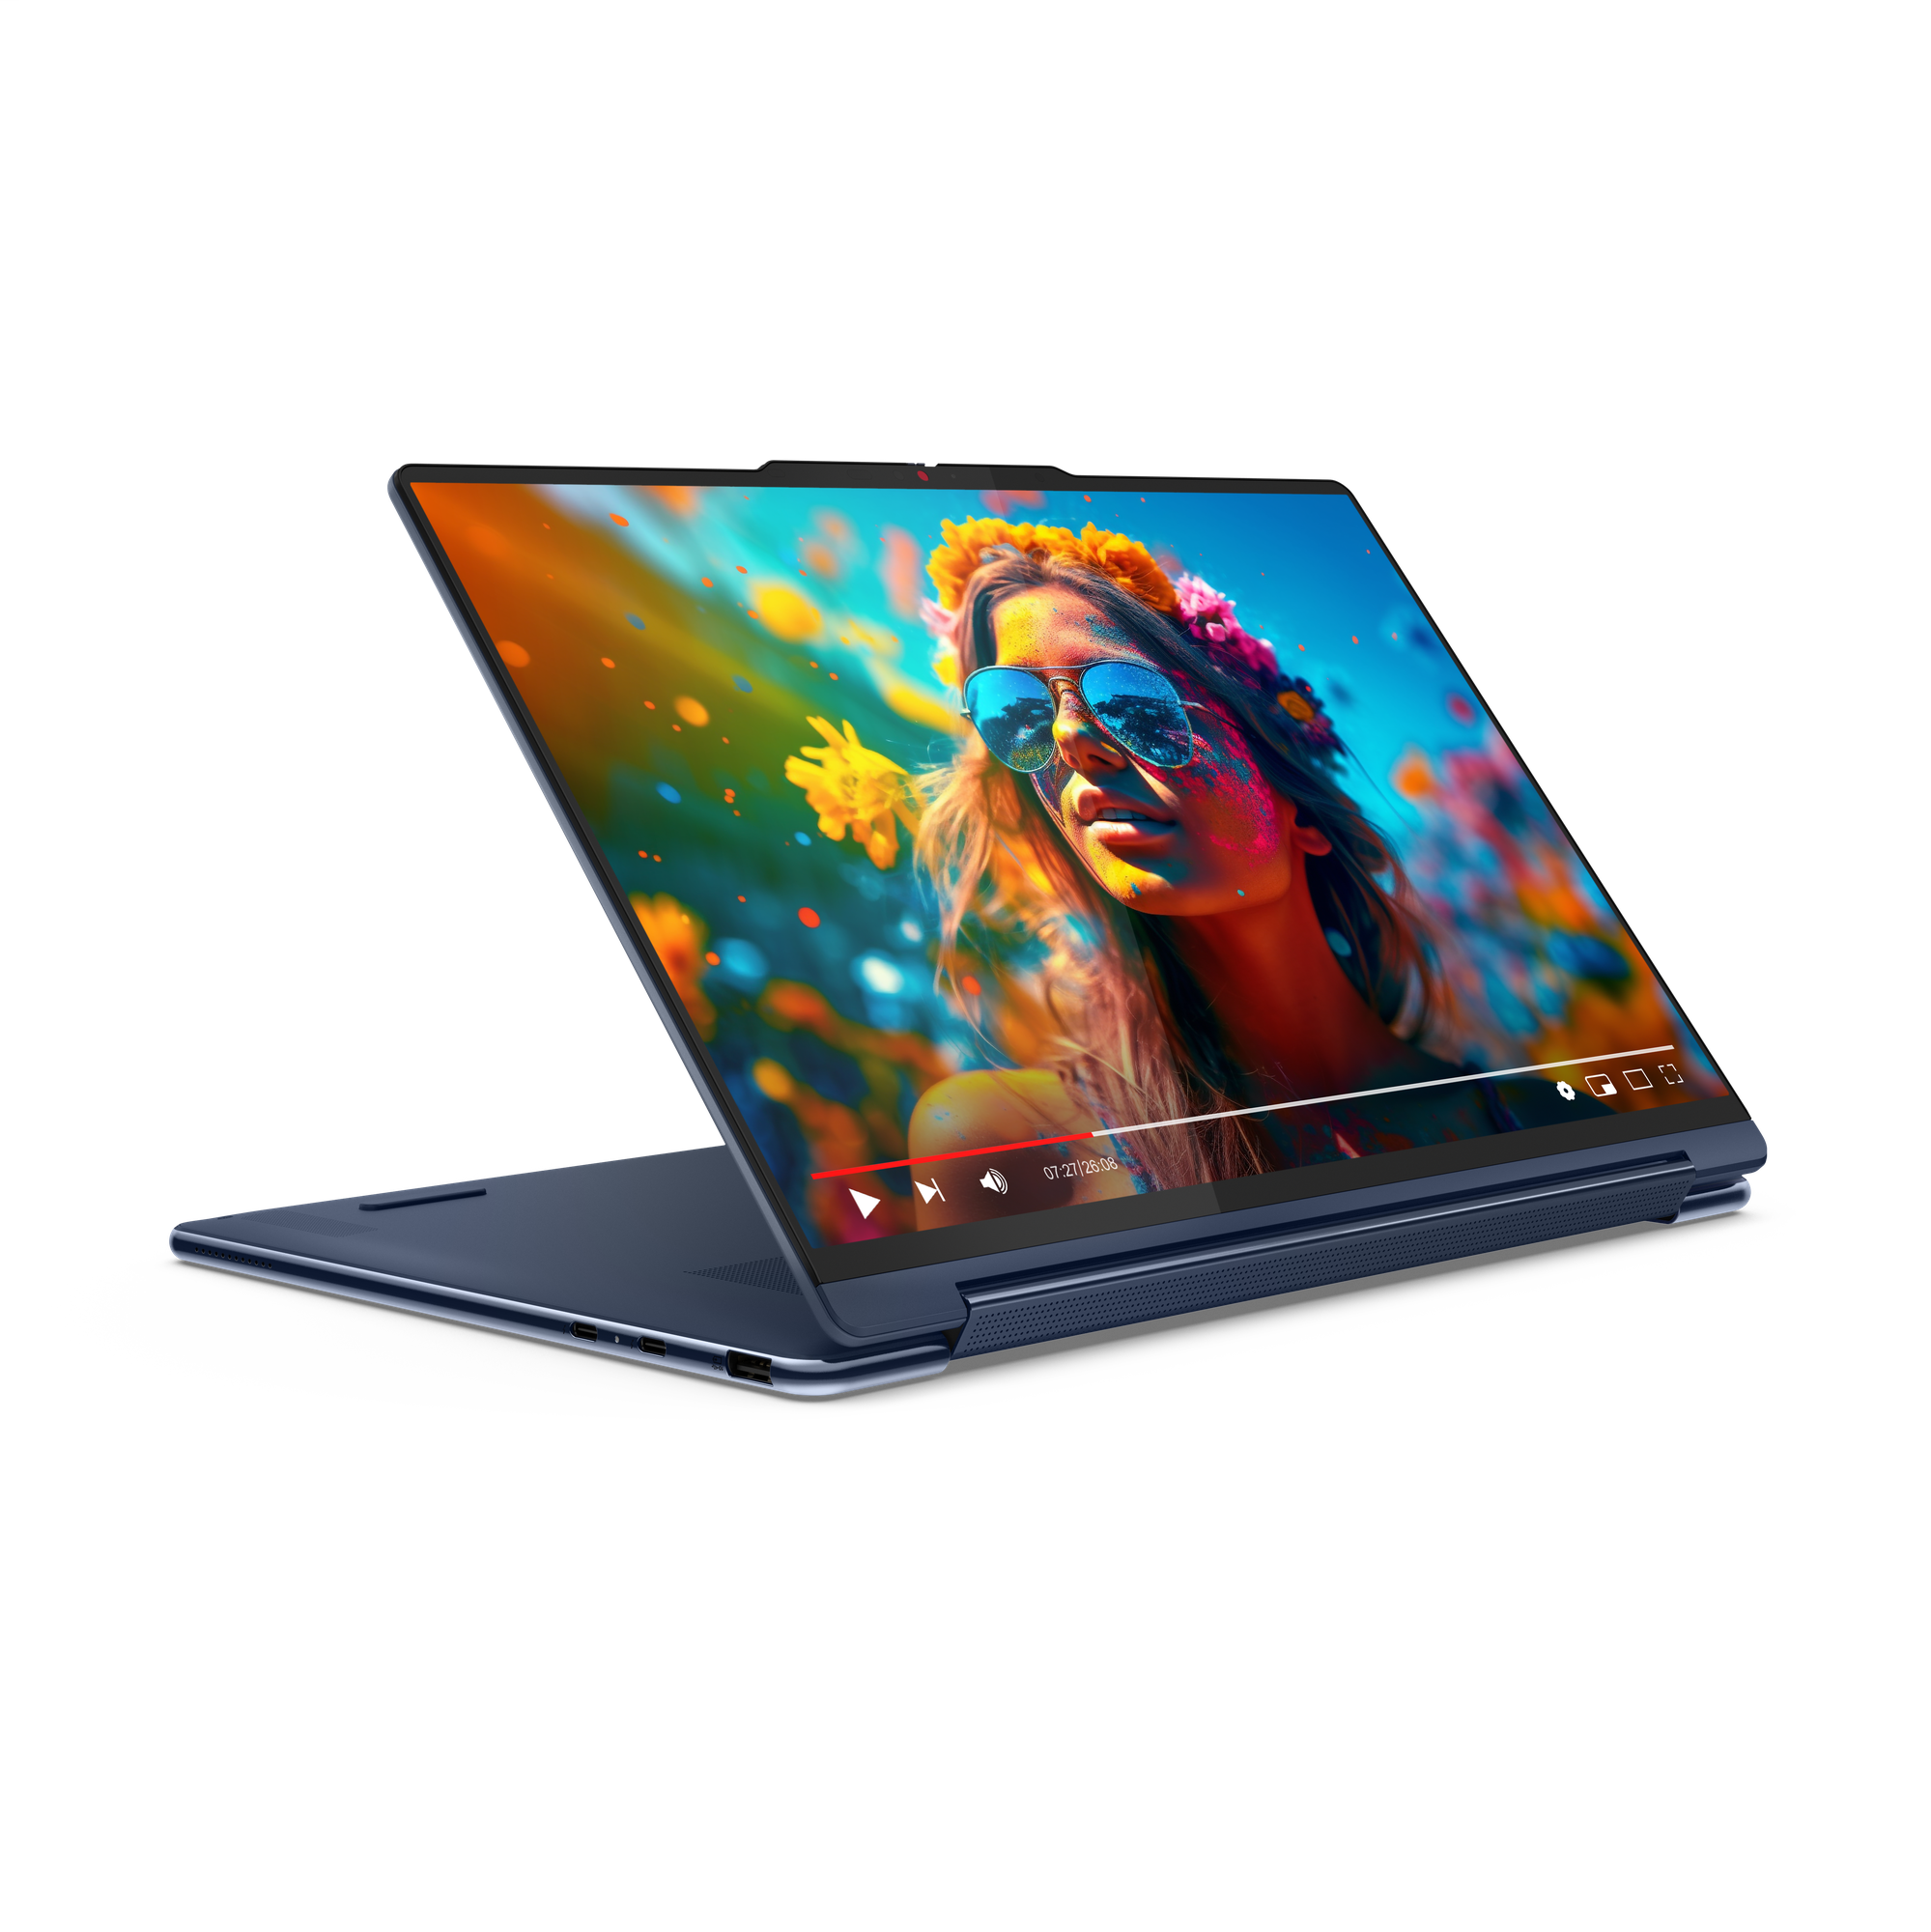 06 Yoga 9i 2 in 1 14 9 Cosmic Blue Display mode 3Q facing right